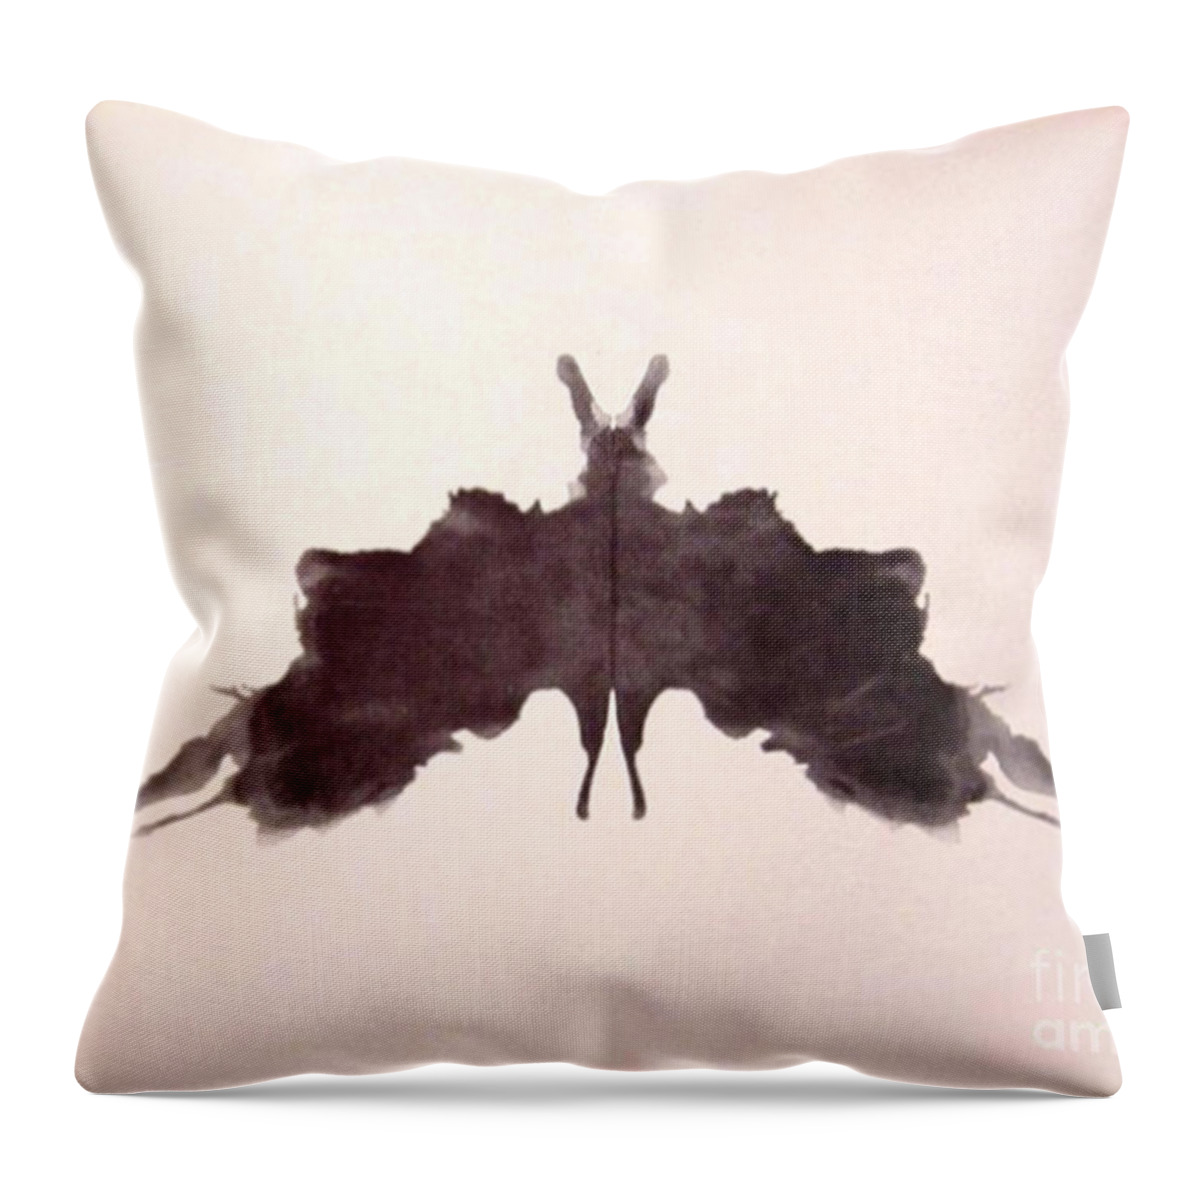 Science Throw Pillow featuring the photograph Rorschach Test Card No. 5 by Science Source